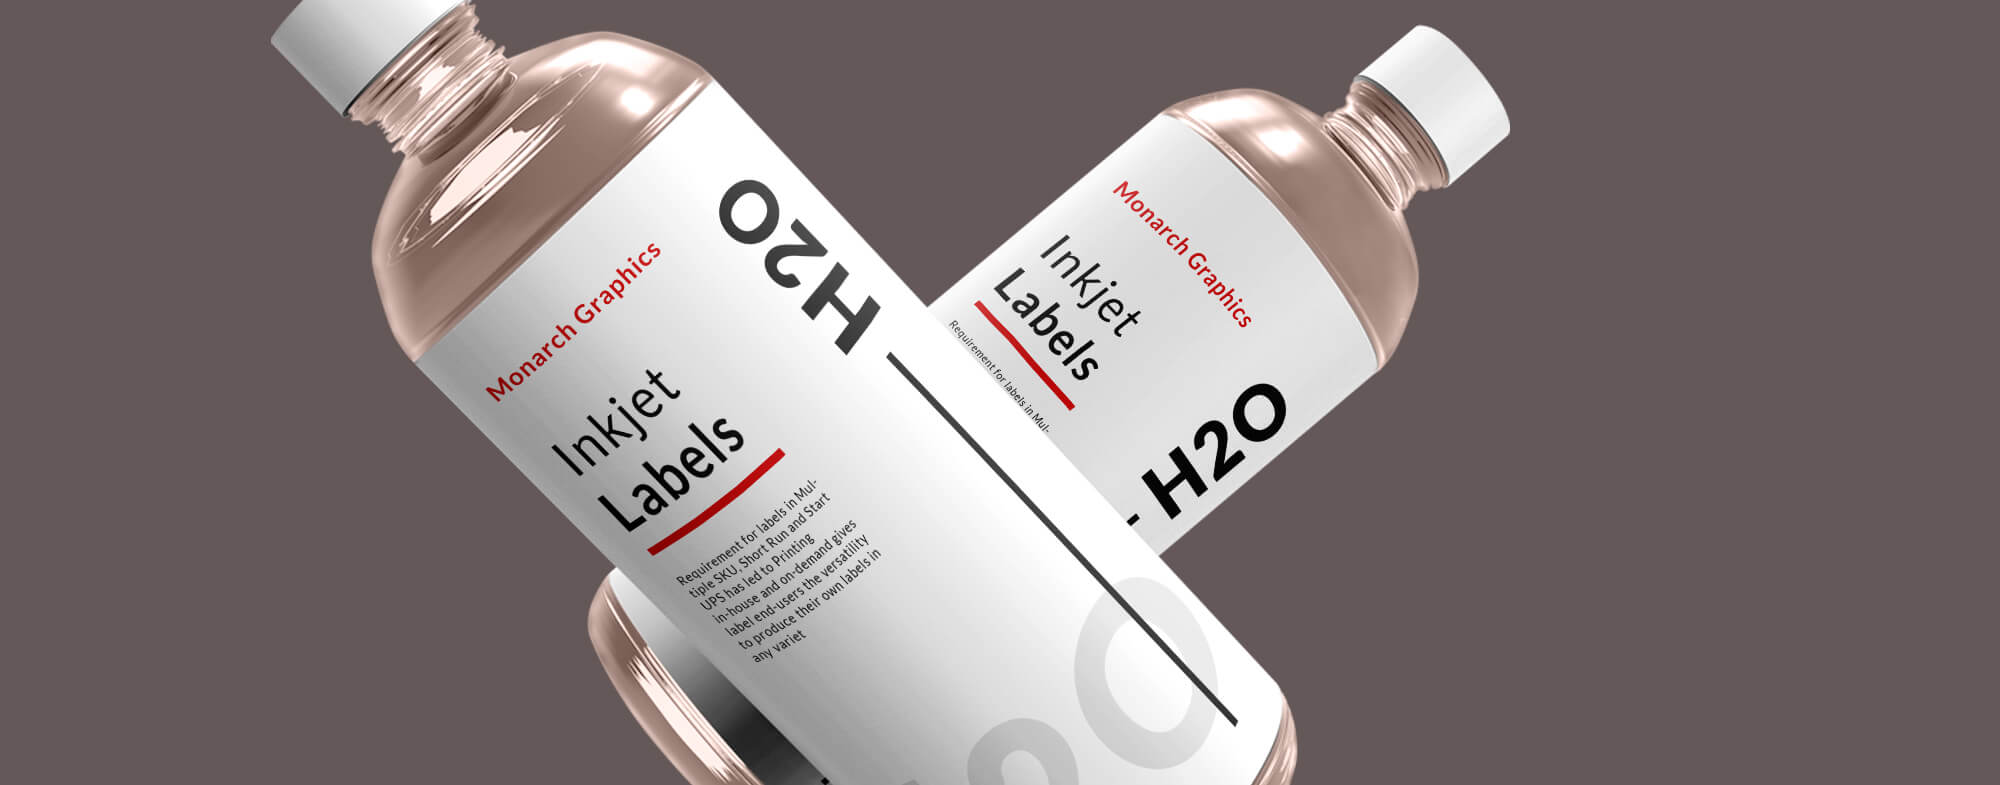 Inkjet & transparent labels with high-definition print quality.